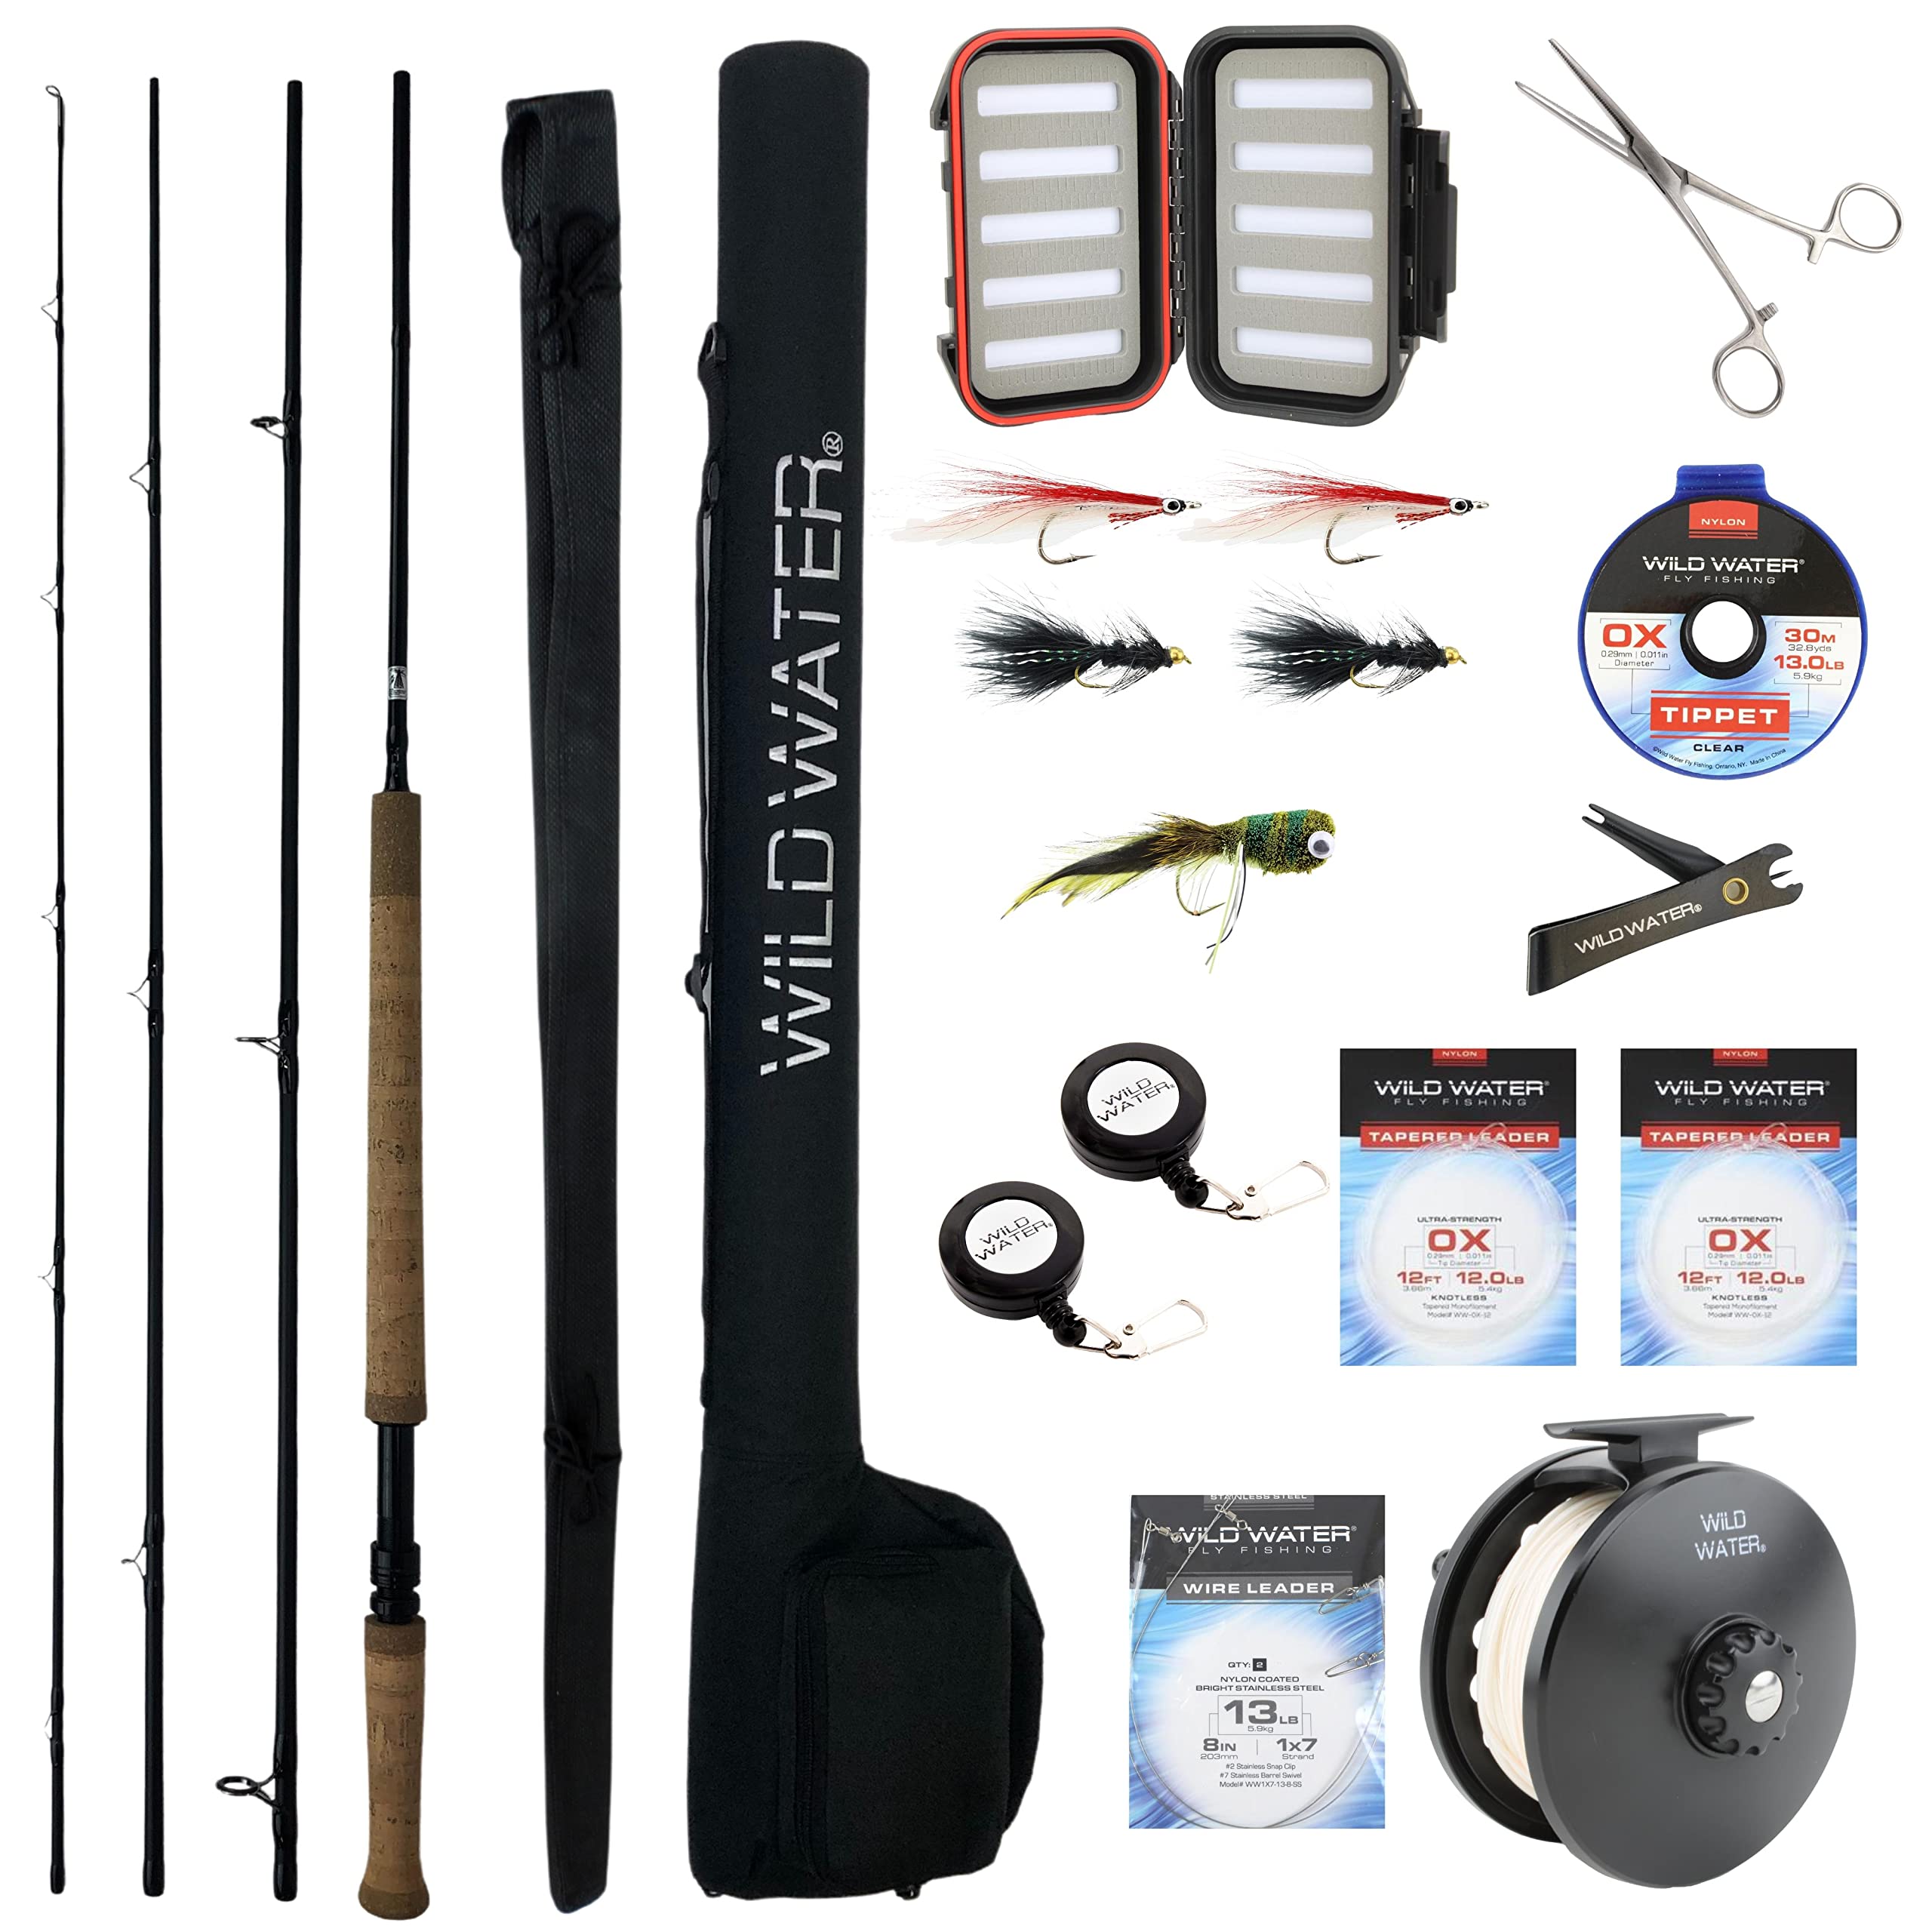 Wild Water Fly Fishing Complete 5 Weight 7 Piece Pack Rod and Reel Starter Package